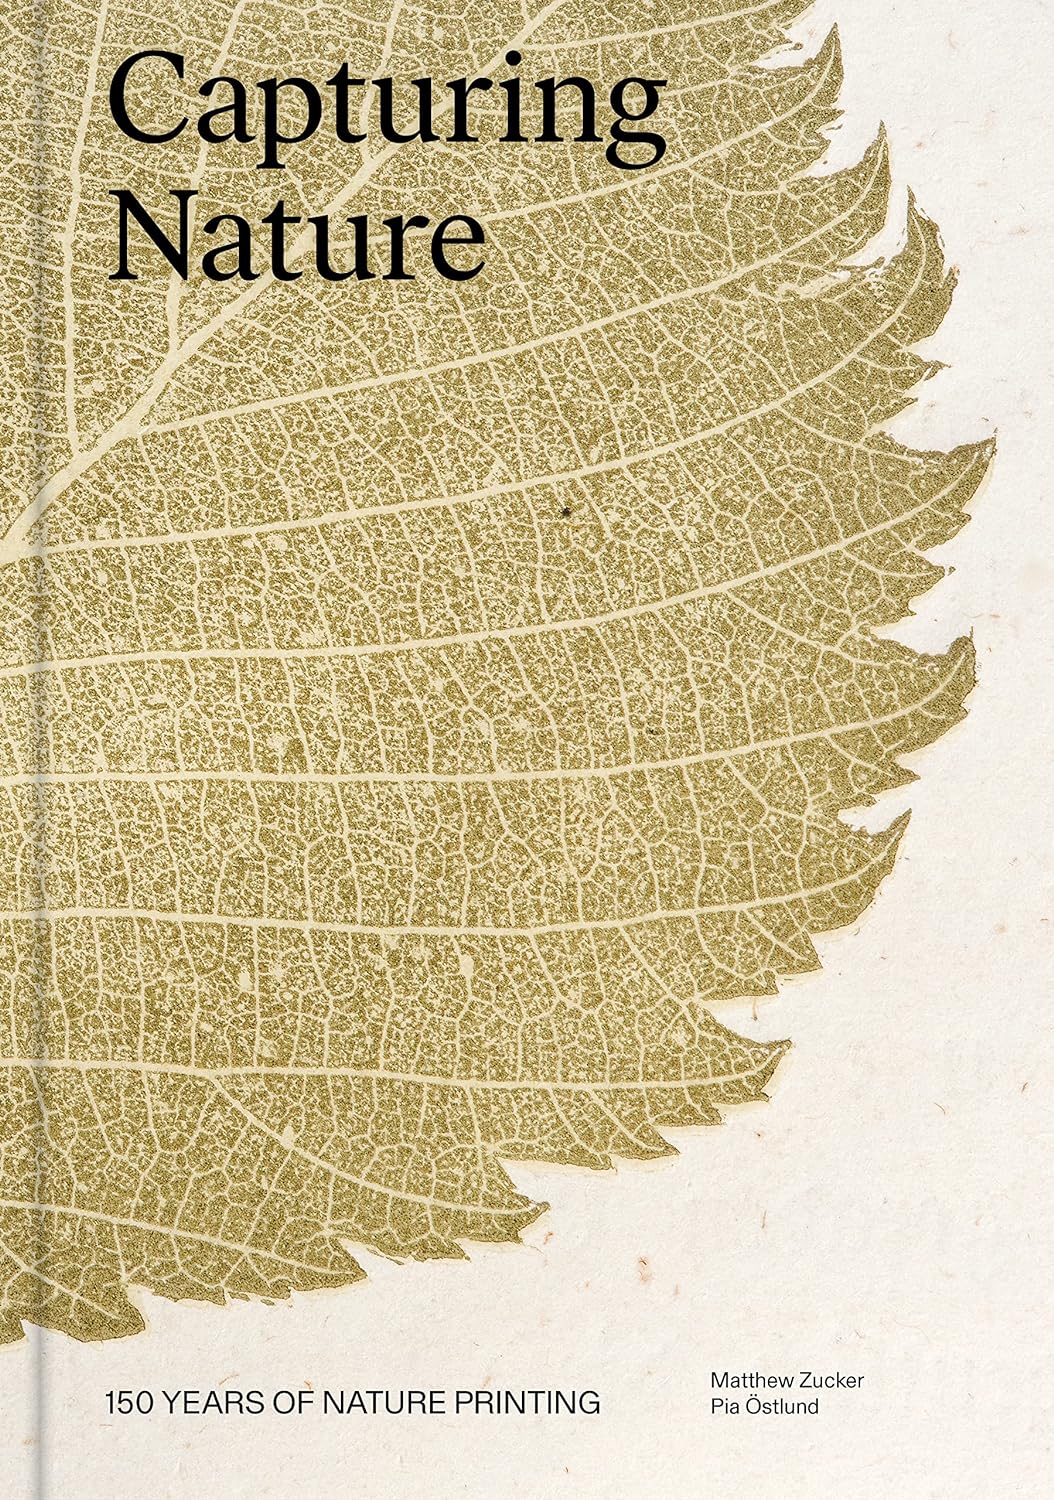 Capturing Nature: 150 Years of Nature Printing by Mathew Zucker and Pia Östlund